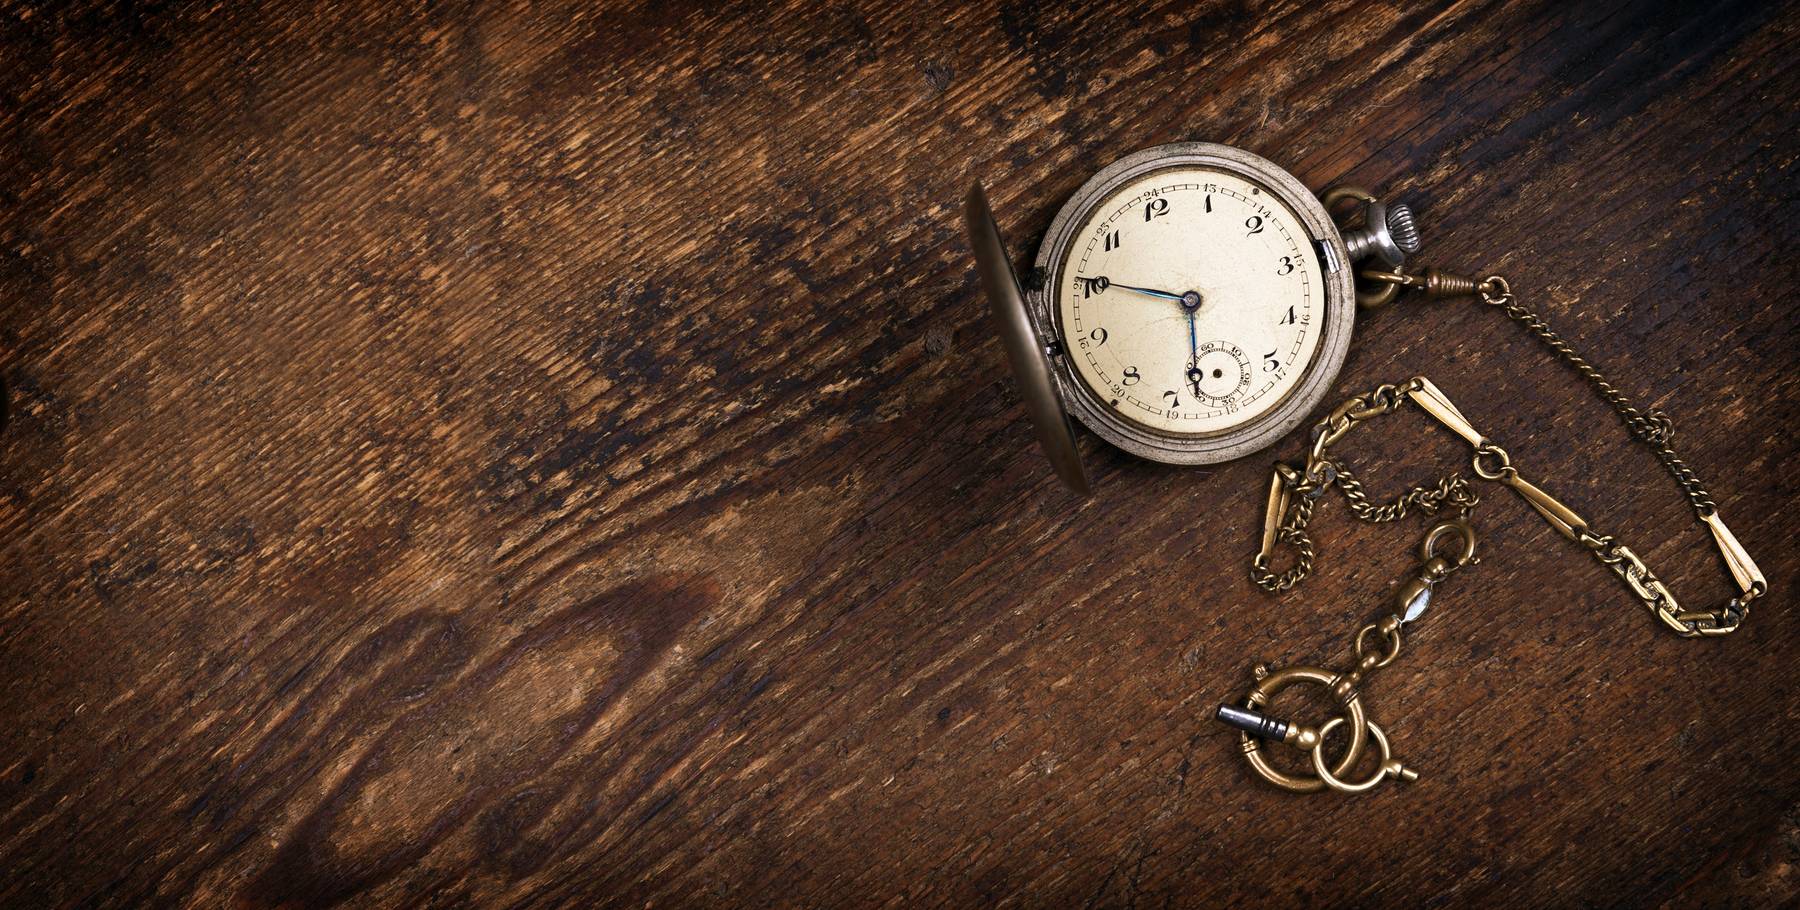 Vintage pocket watch on wooden table